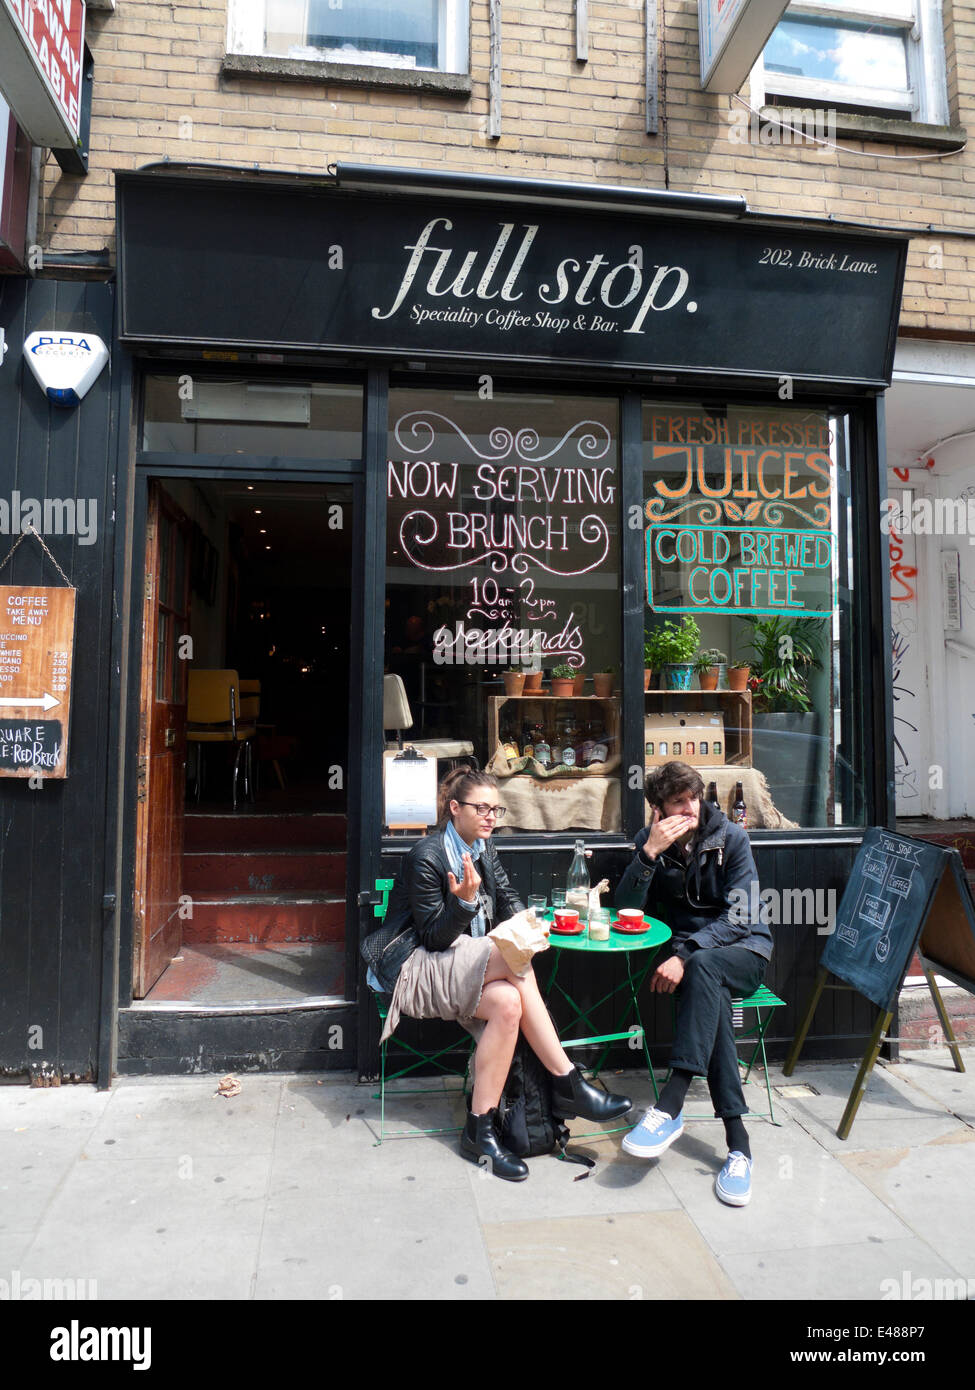 A young couple having a coffee at outside table Full Stop cate shop in Brick Lane Spitalfields East London E1 UK    KATHY DEWITT Stock Photo